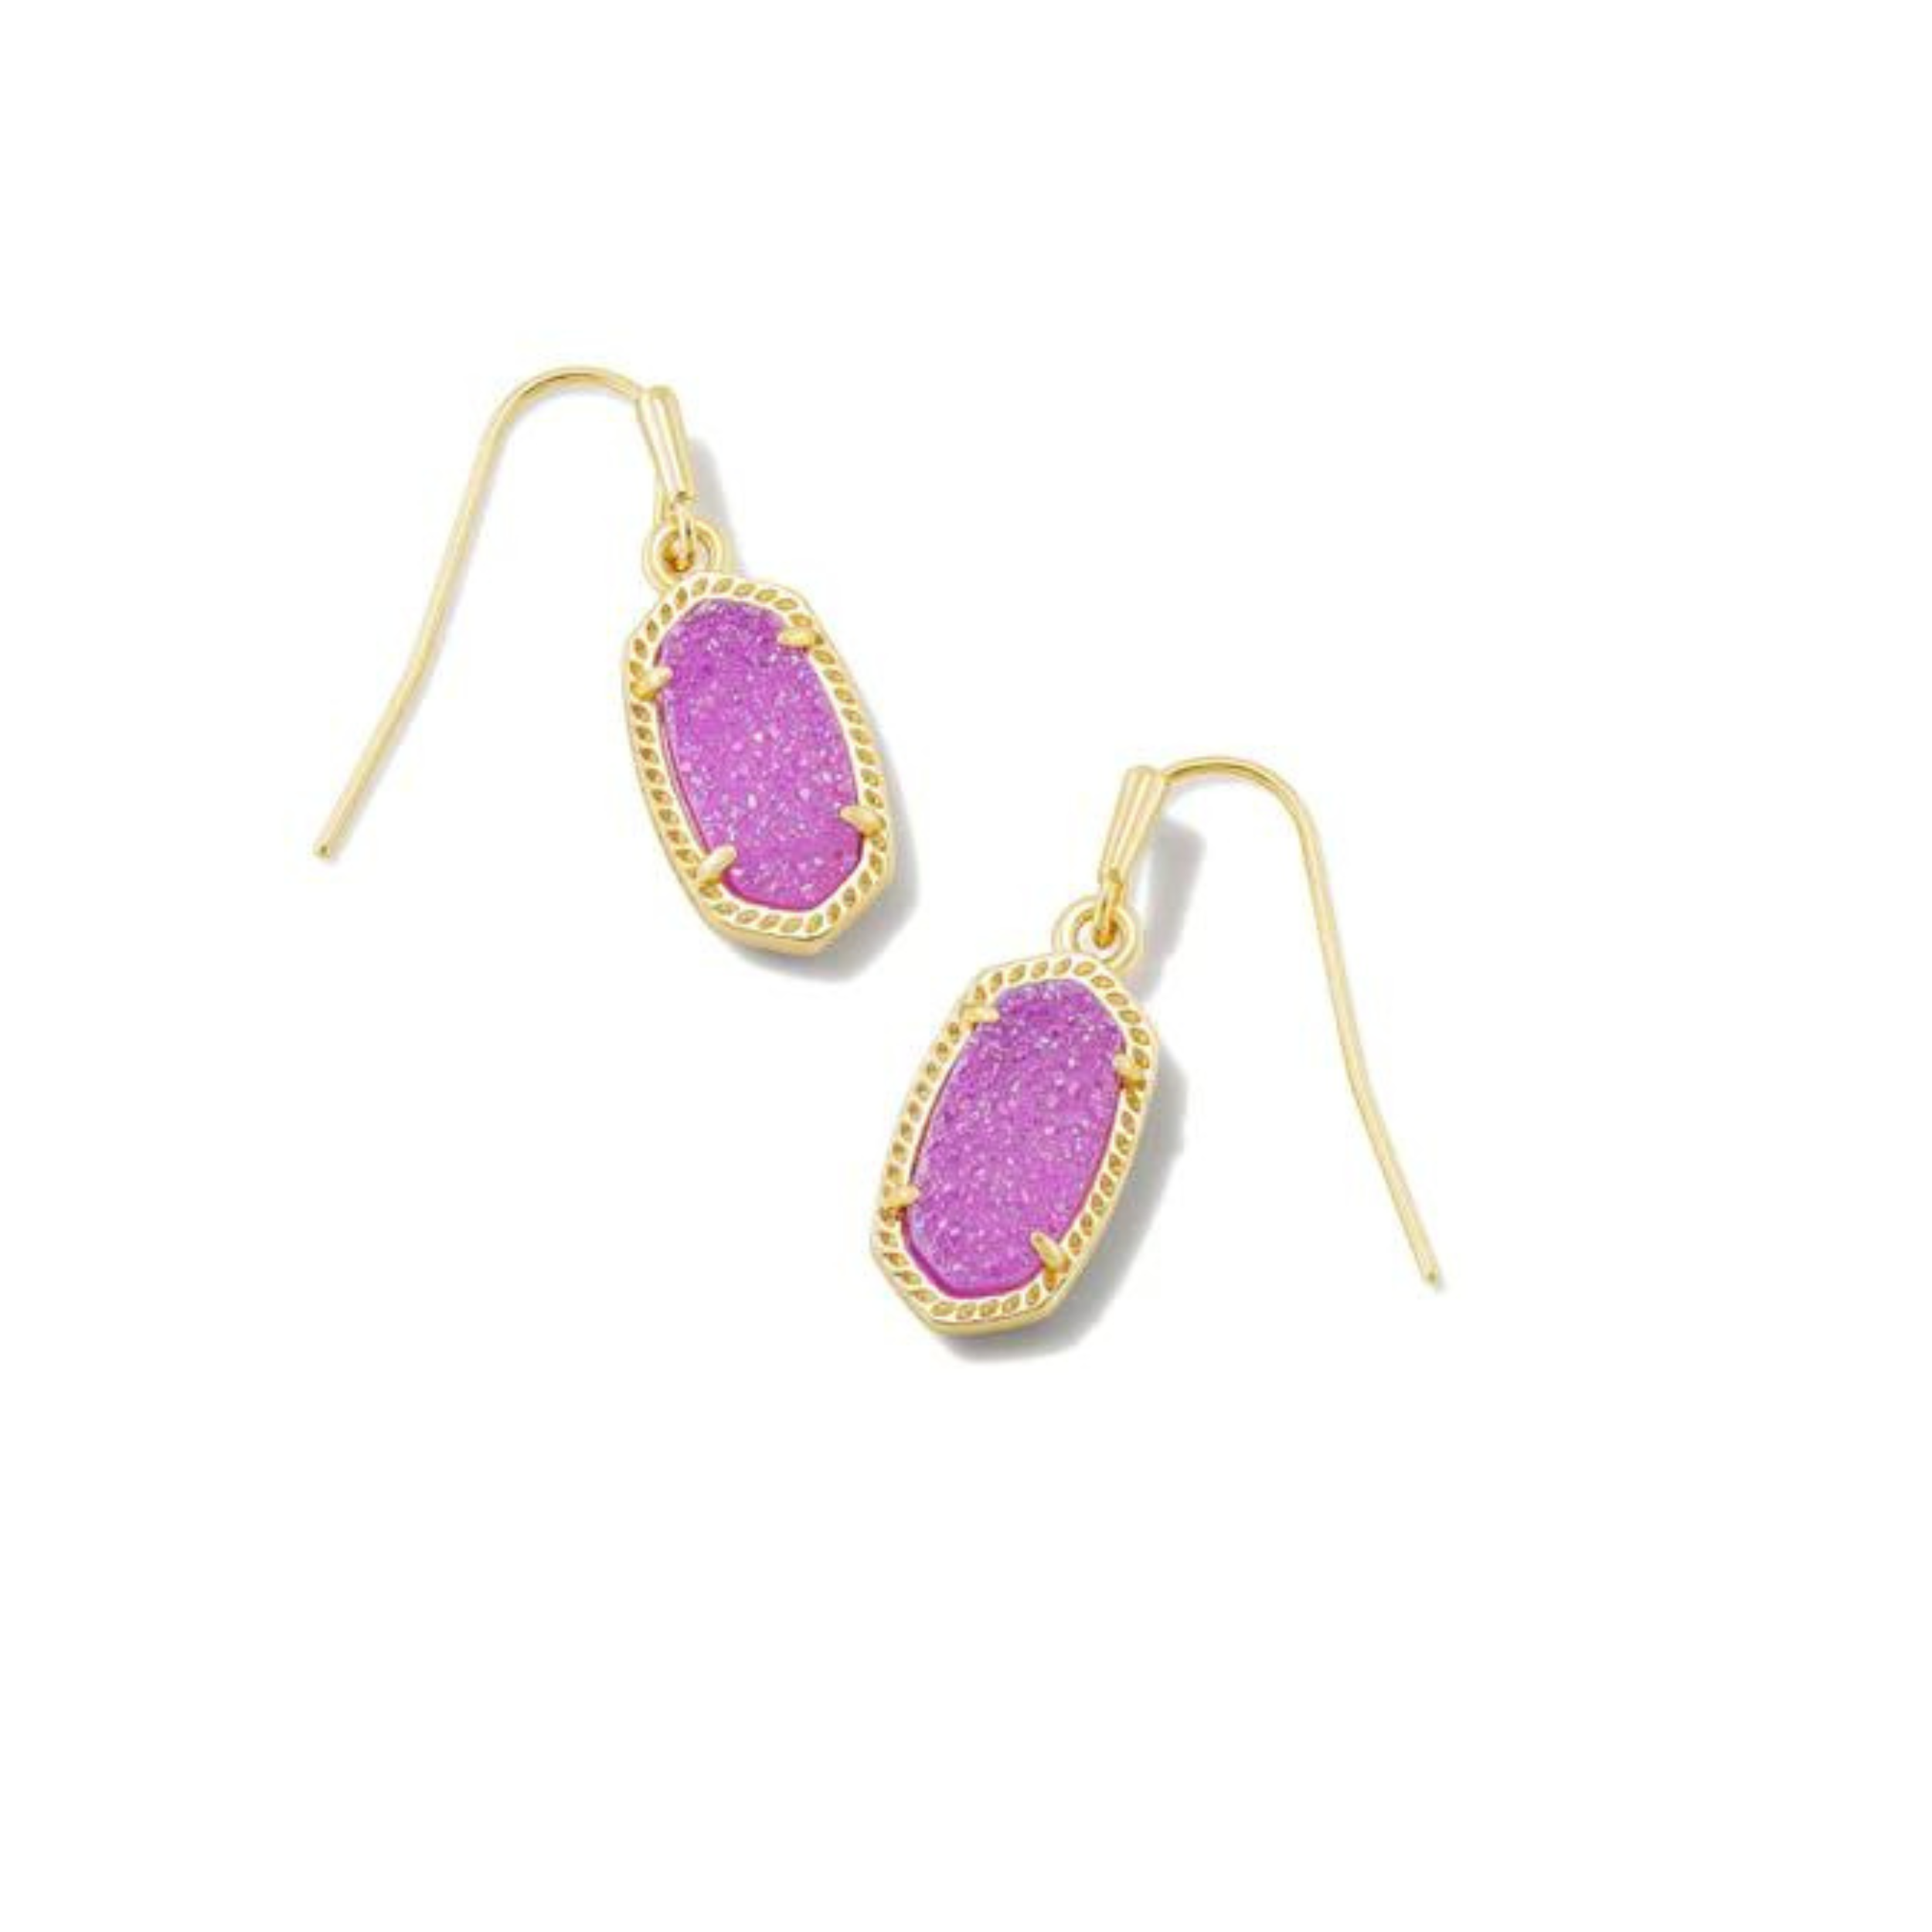 Gold drop earrings with drusy murberry stones, pictured on a white background.